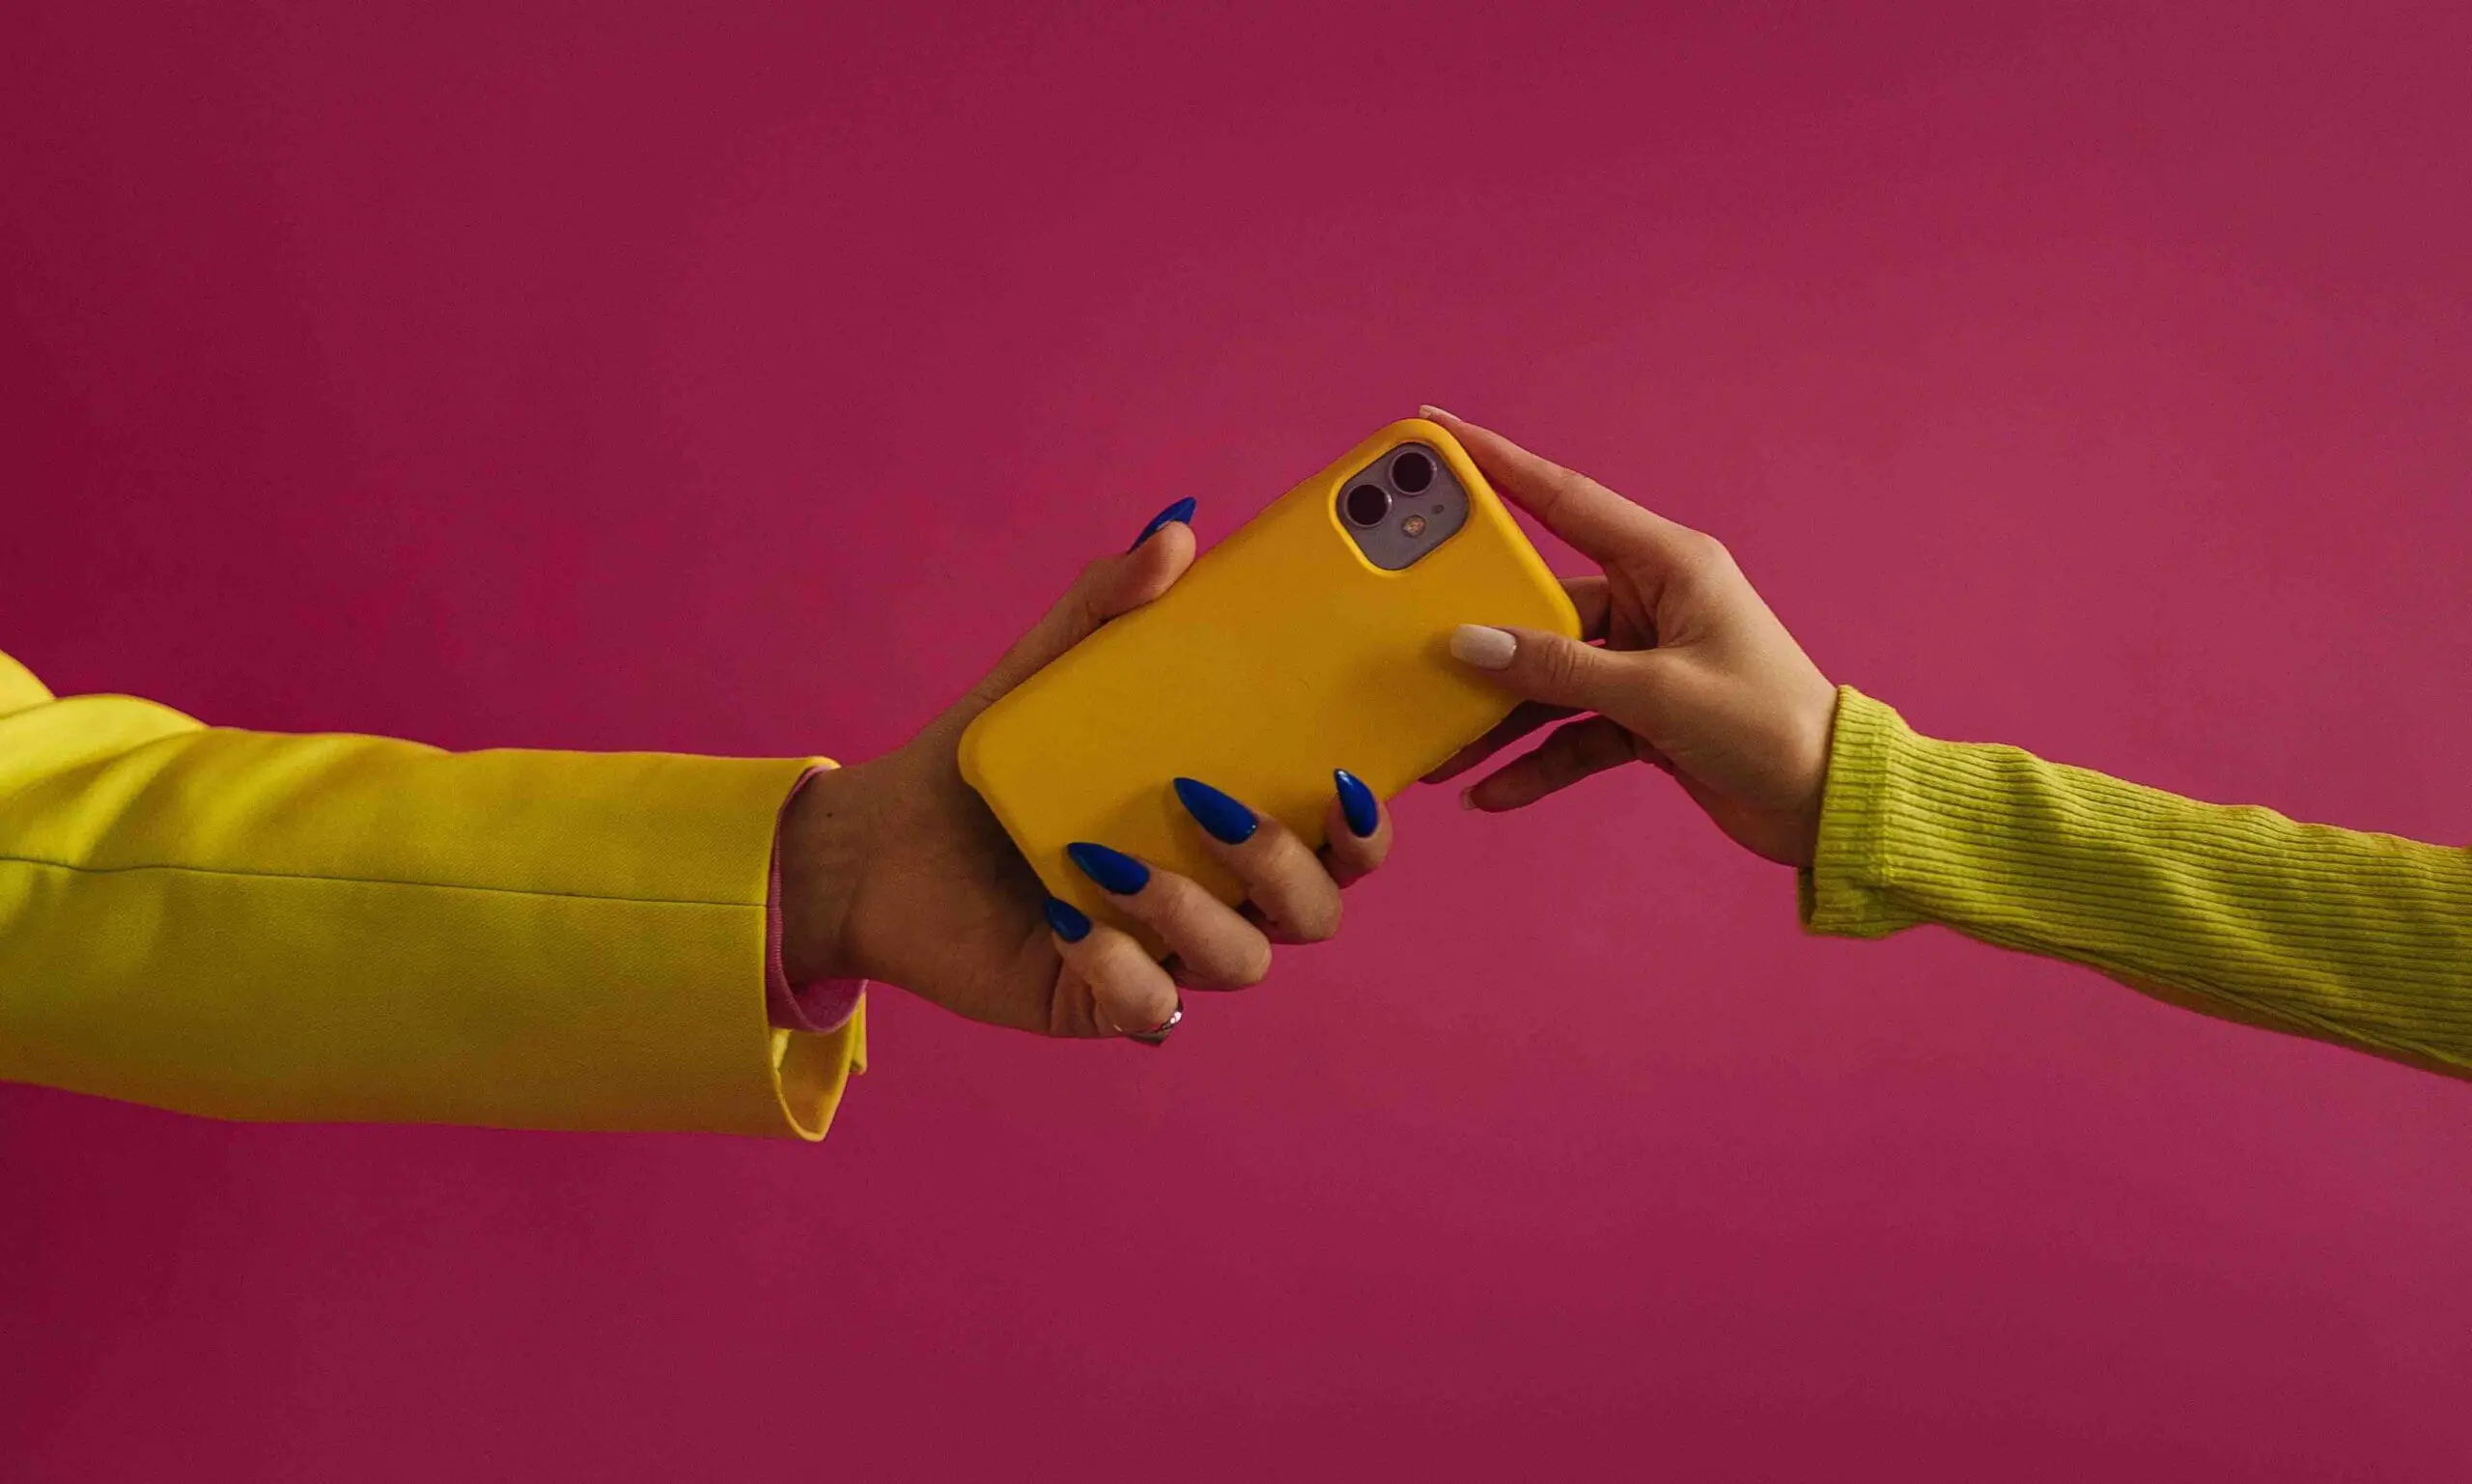 Two women in a pink background holding a phone with yellow casing